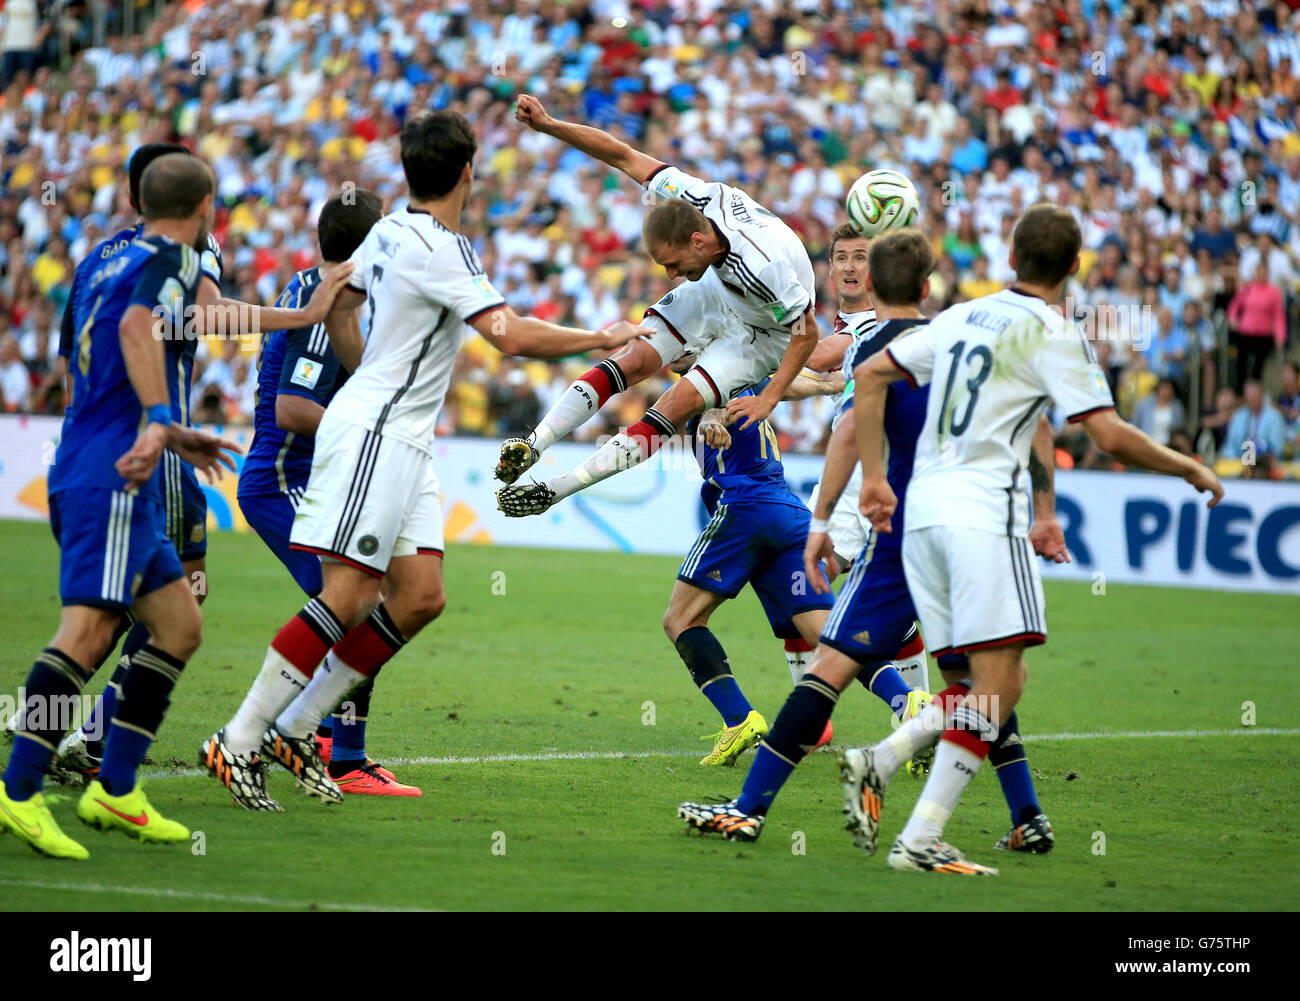 Soccer - FIFA World Cup 2014 - Final - Germany v Argentina - Estadio do Maracana. Action in the box as Germany's Benedikt Howedes has a header on target Stock Photo